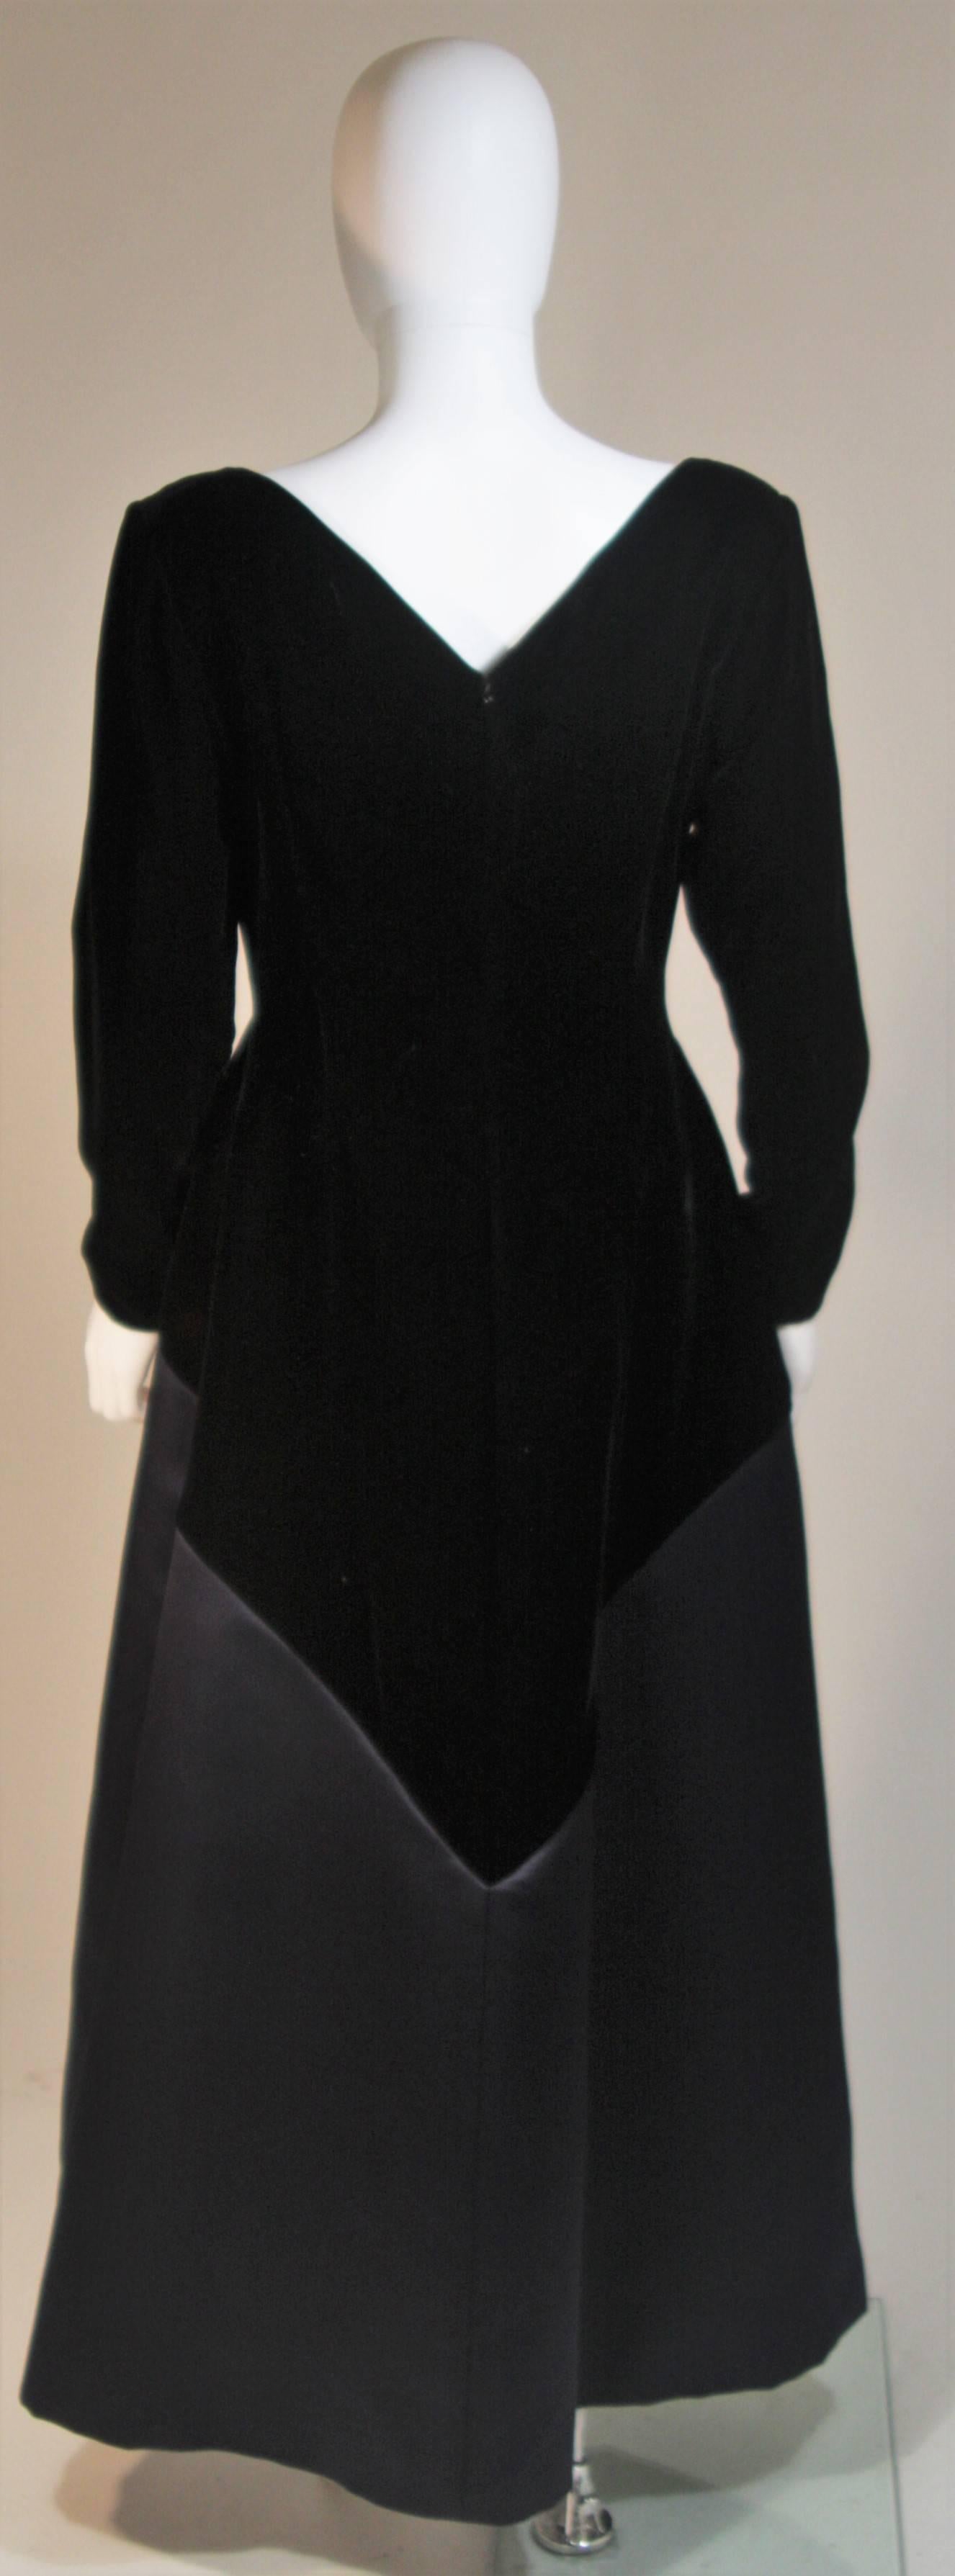 BILL BLASS Circa 1980's-1990's Velvet and Navy Satin Contrast Gown Size 12 For Sale 2